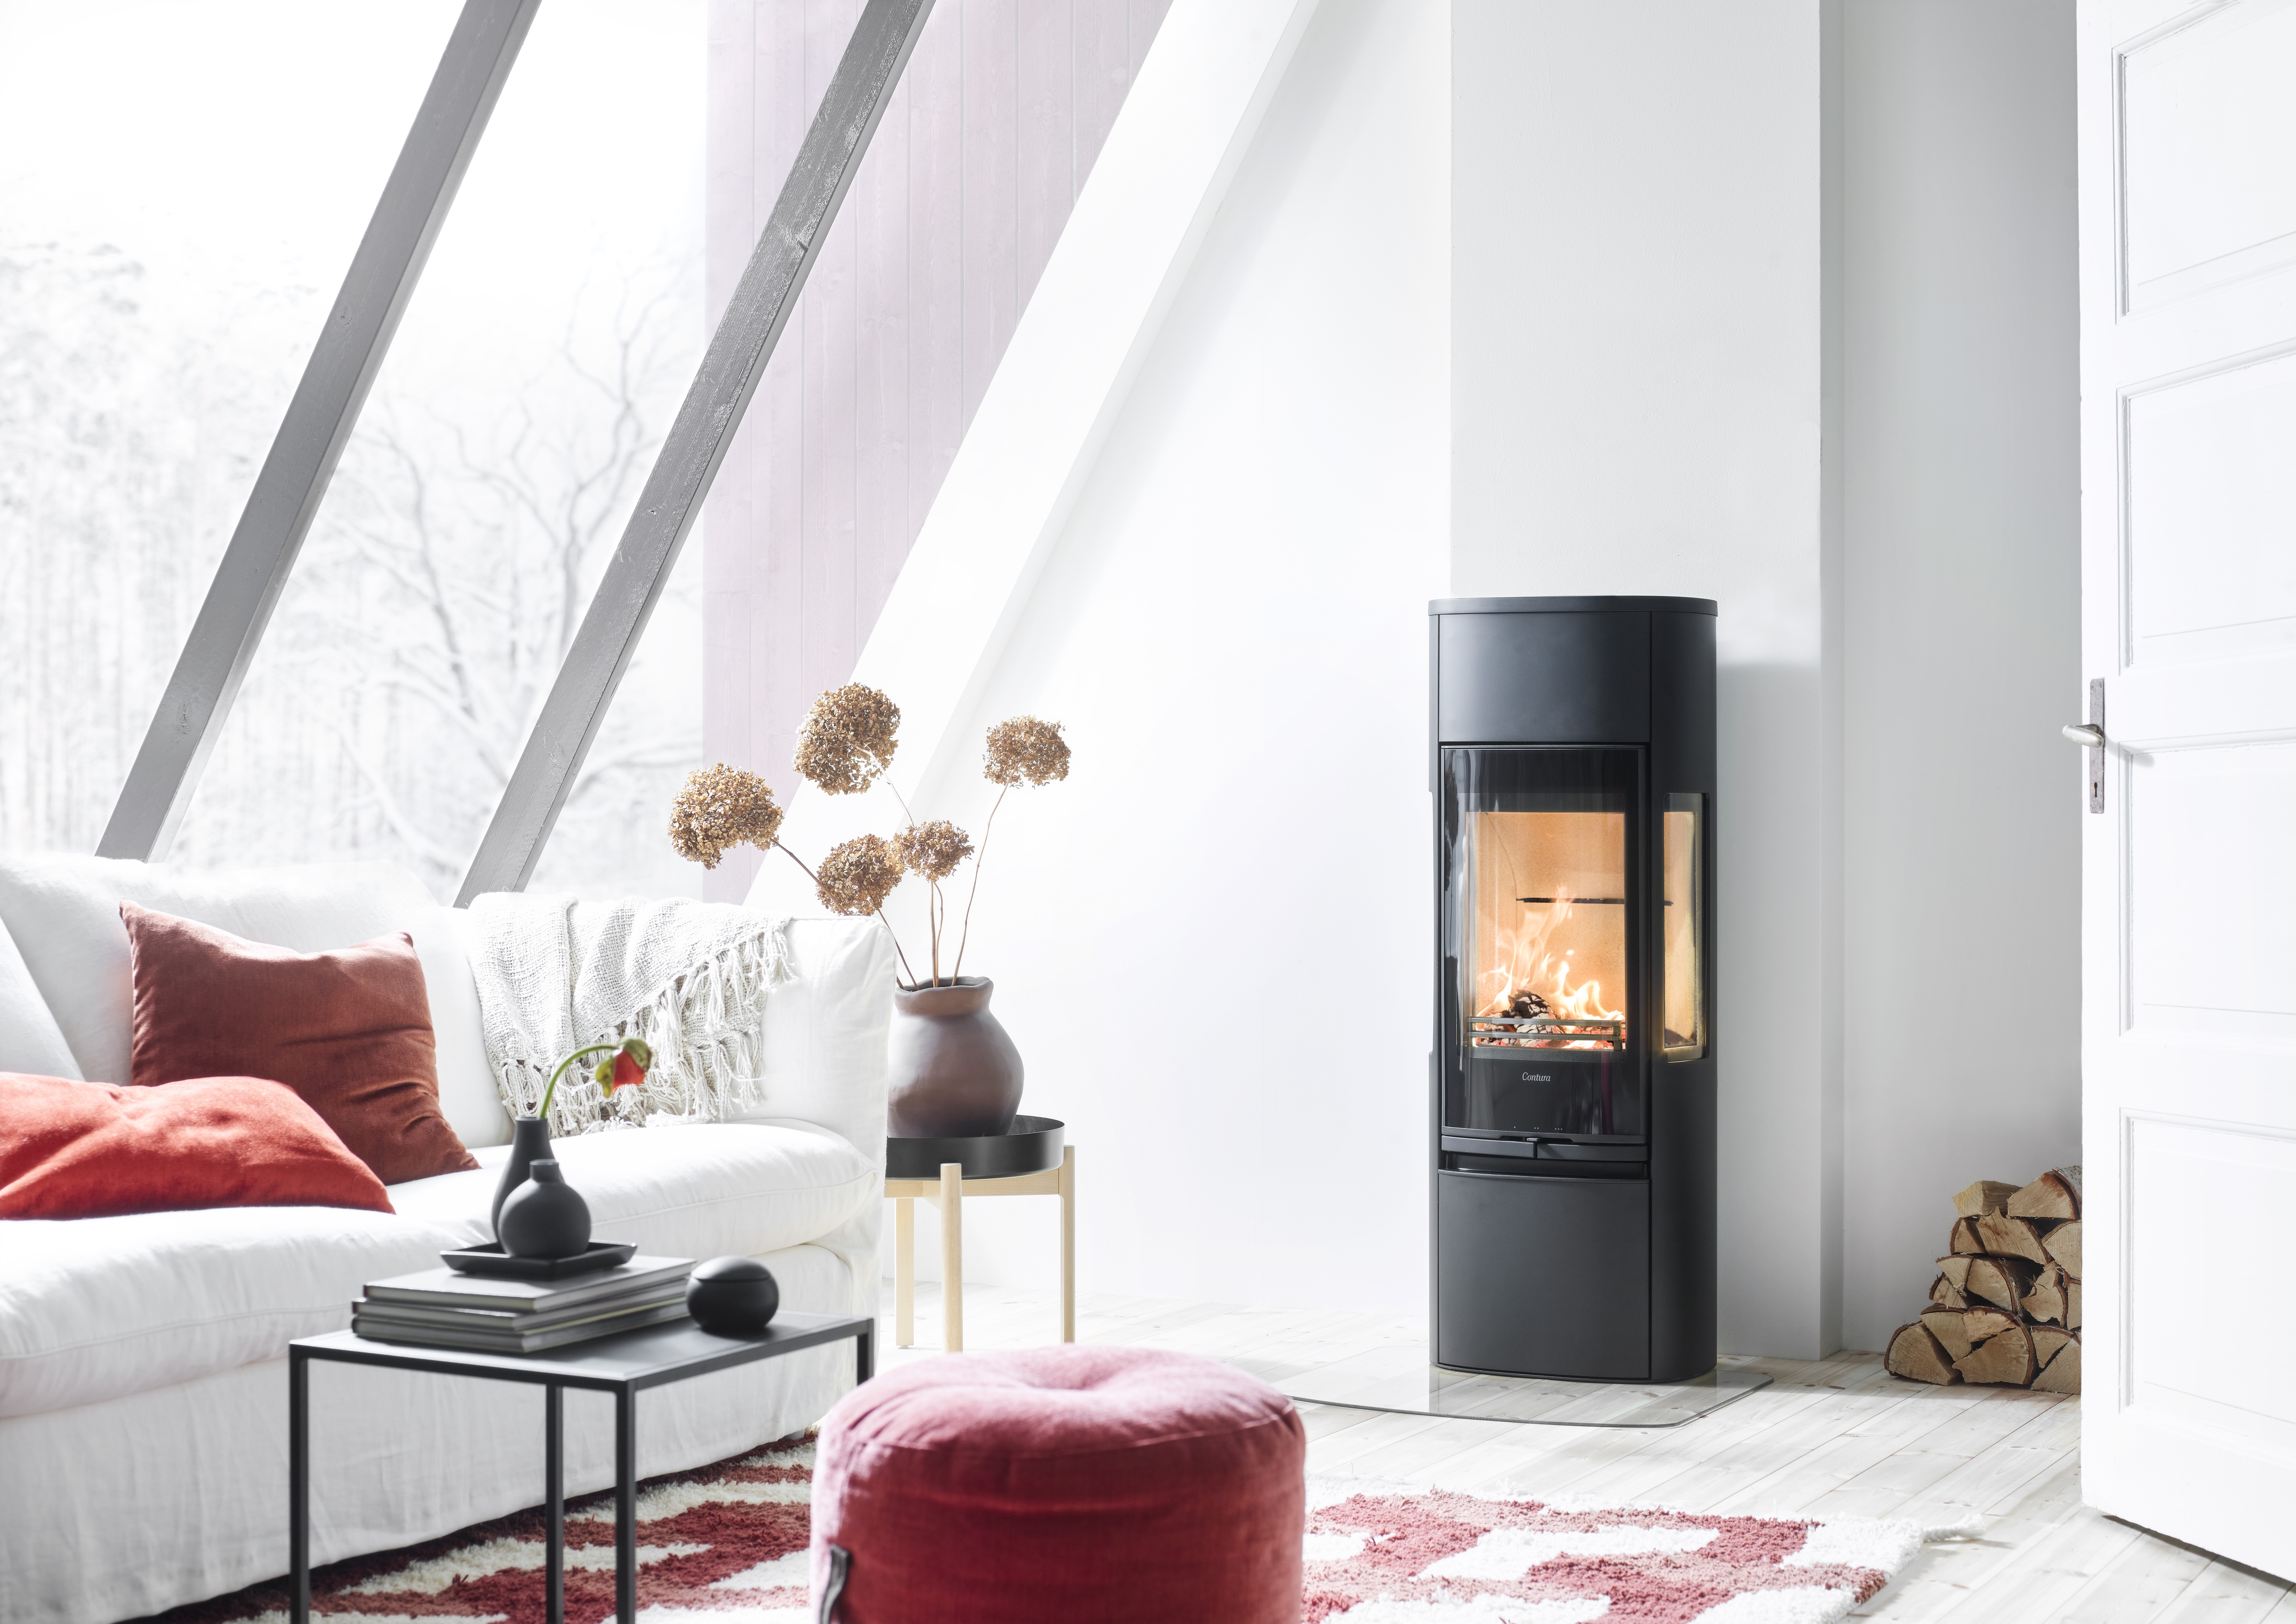 An example of a contemporary style log burner in a modern home. Home Statements